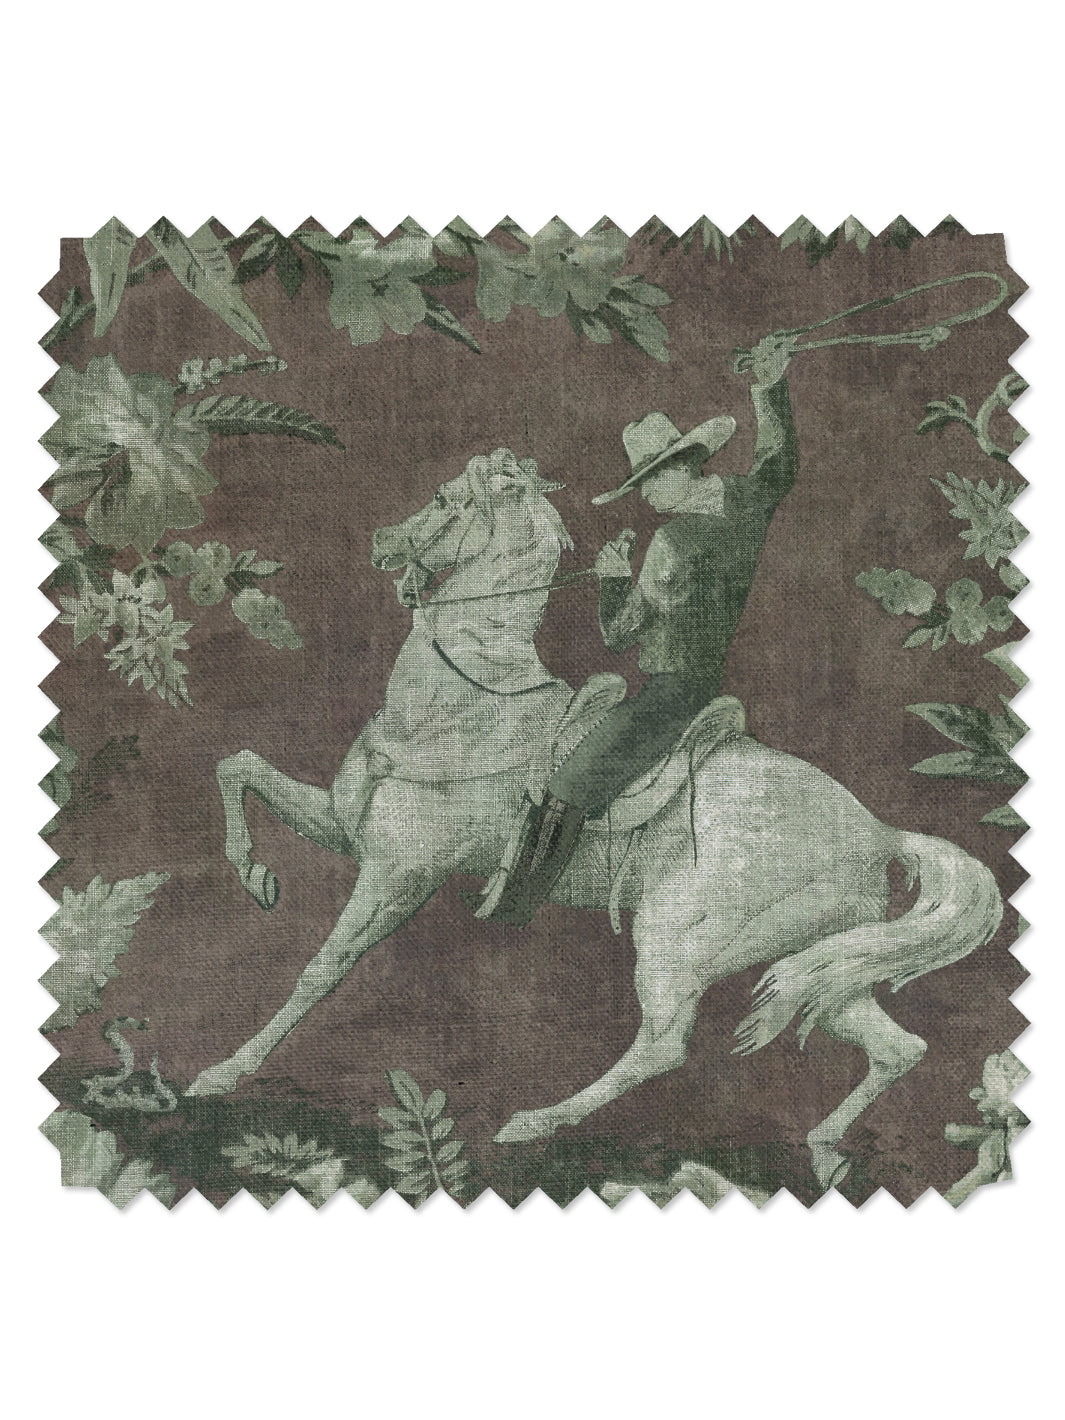 'Cowboy Toile' Linen Fabric by Nathan Turner - Moss Brown